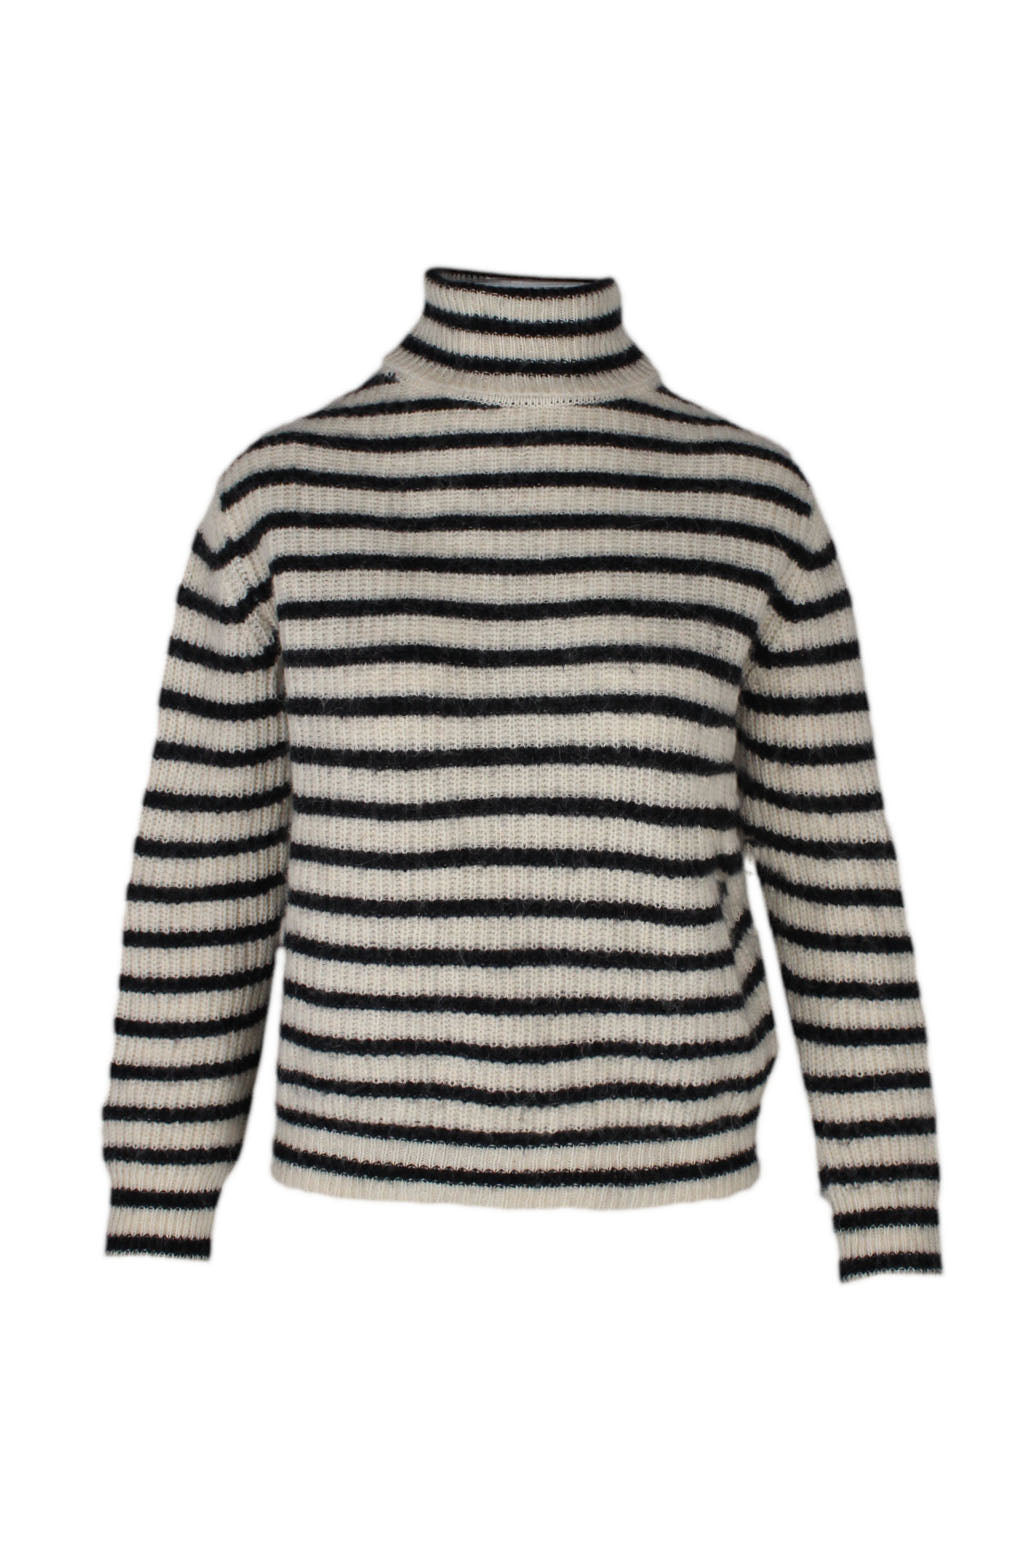 description: iro wool black and white striped long sleeve sweater. features turtle neck, loose fit, and straight bottom hem. 